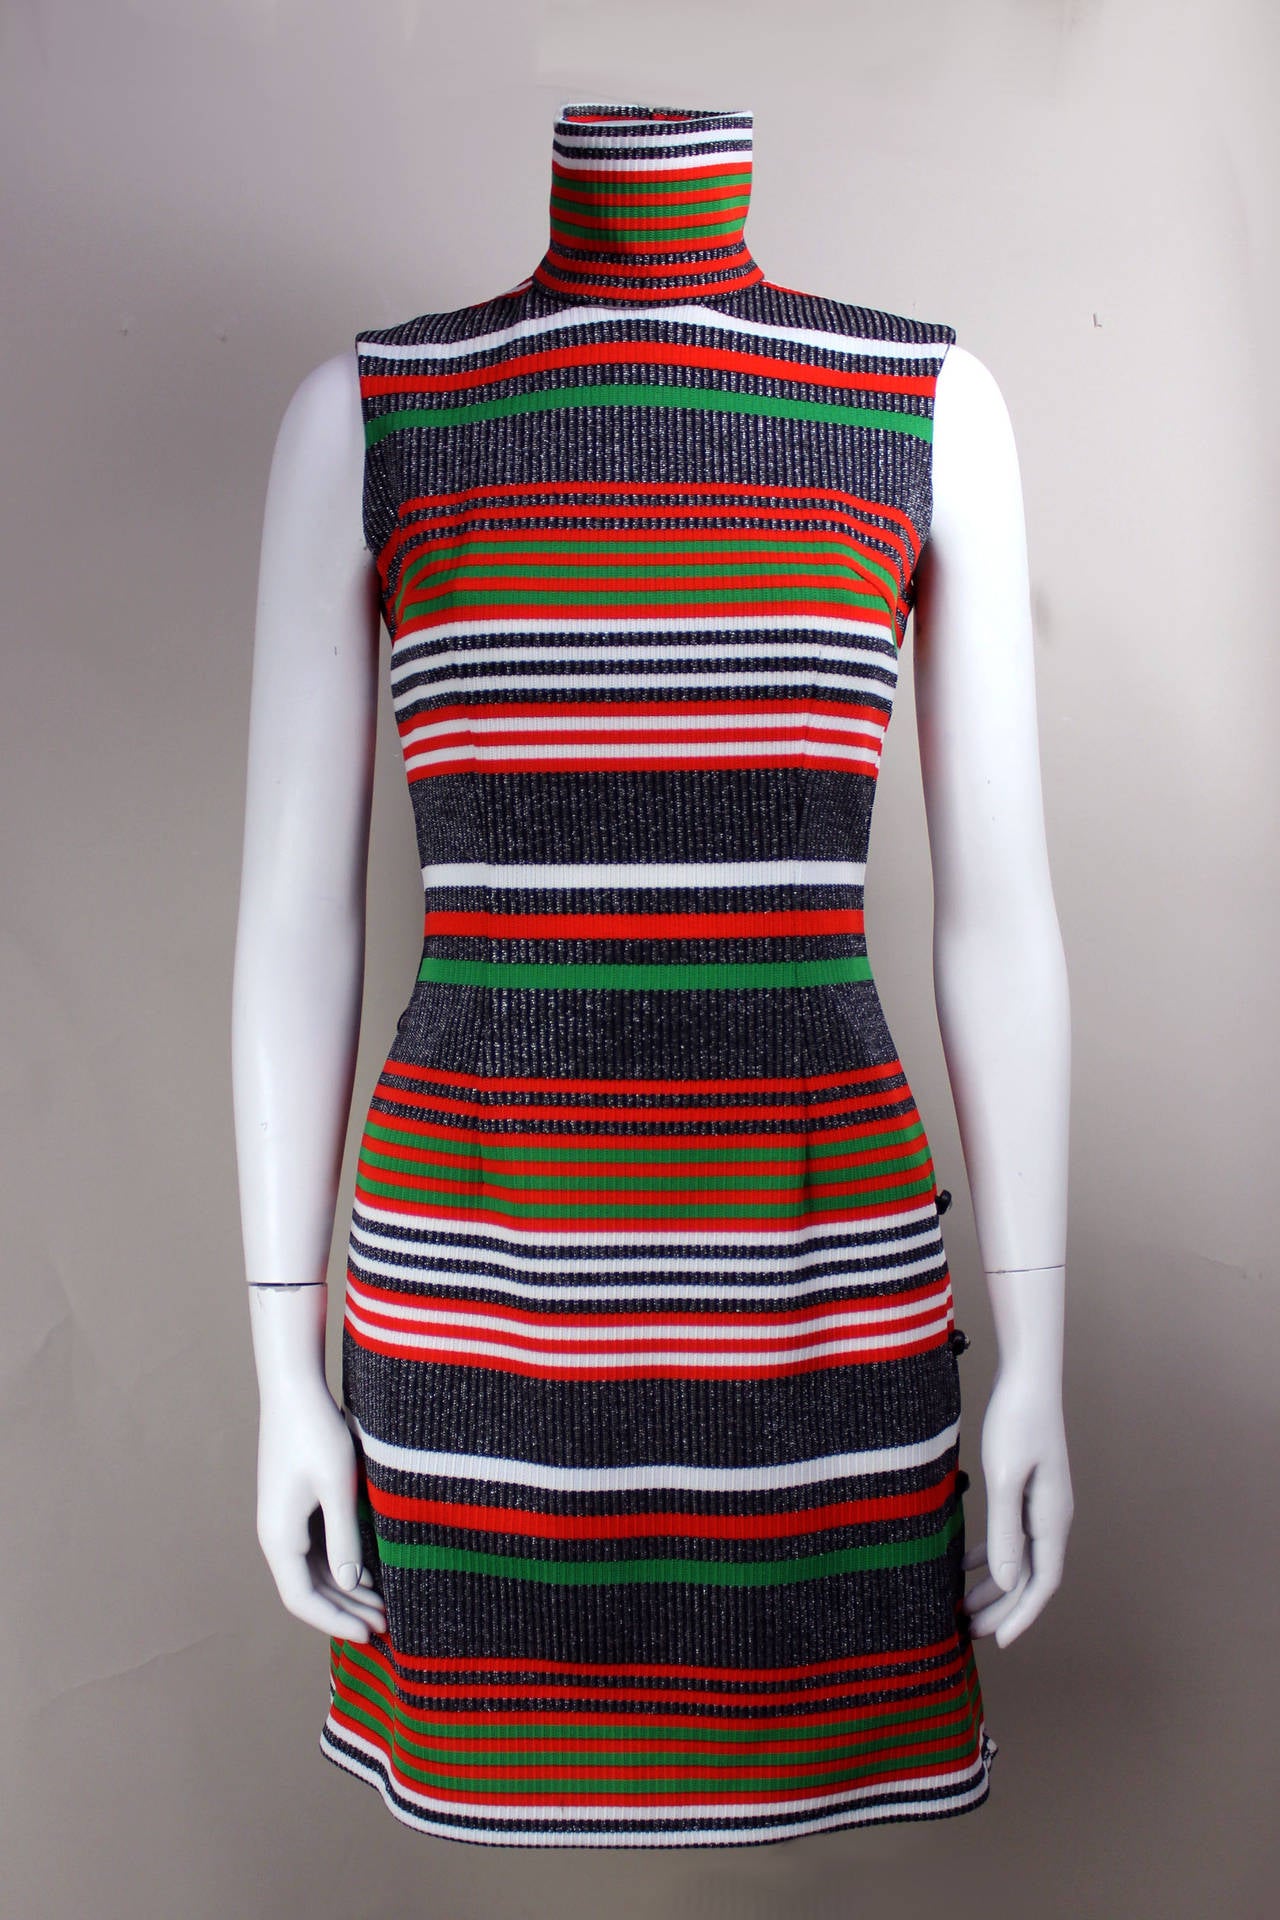 This late 1960s/early 1970s striped knit dress is very appealing with lovely design details. The background is a silver lurex knit with red, white, black, and green stripes. The skirt is a slight A-line with a row of rhinestone buttons along the